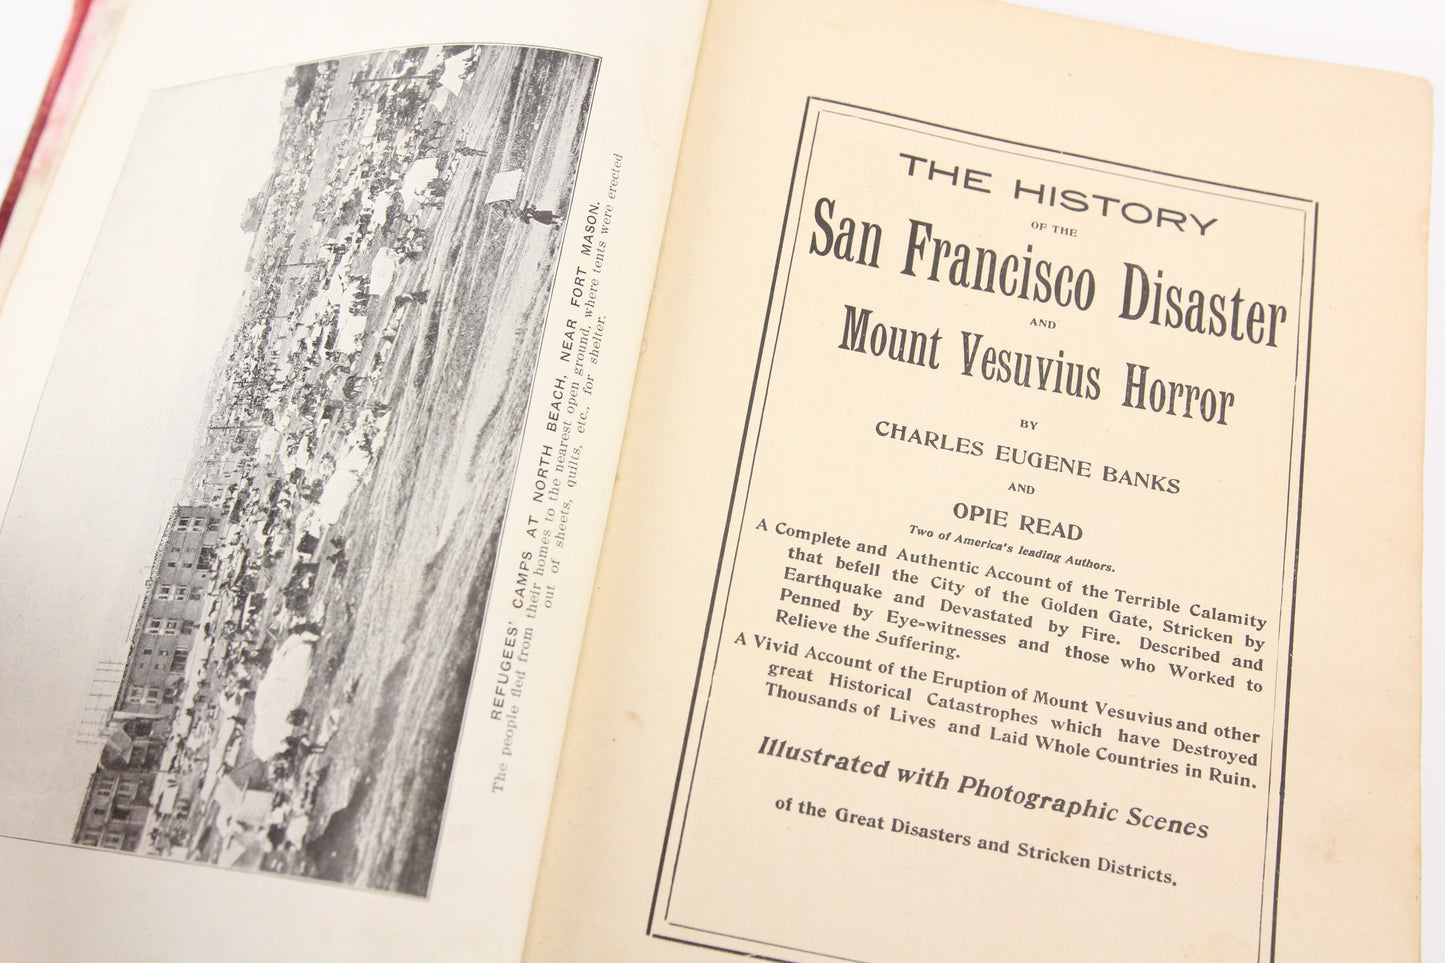 The San Francisco Disaster by Charles Banks & Opie Read, Copyright 1906